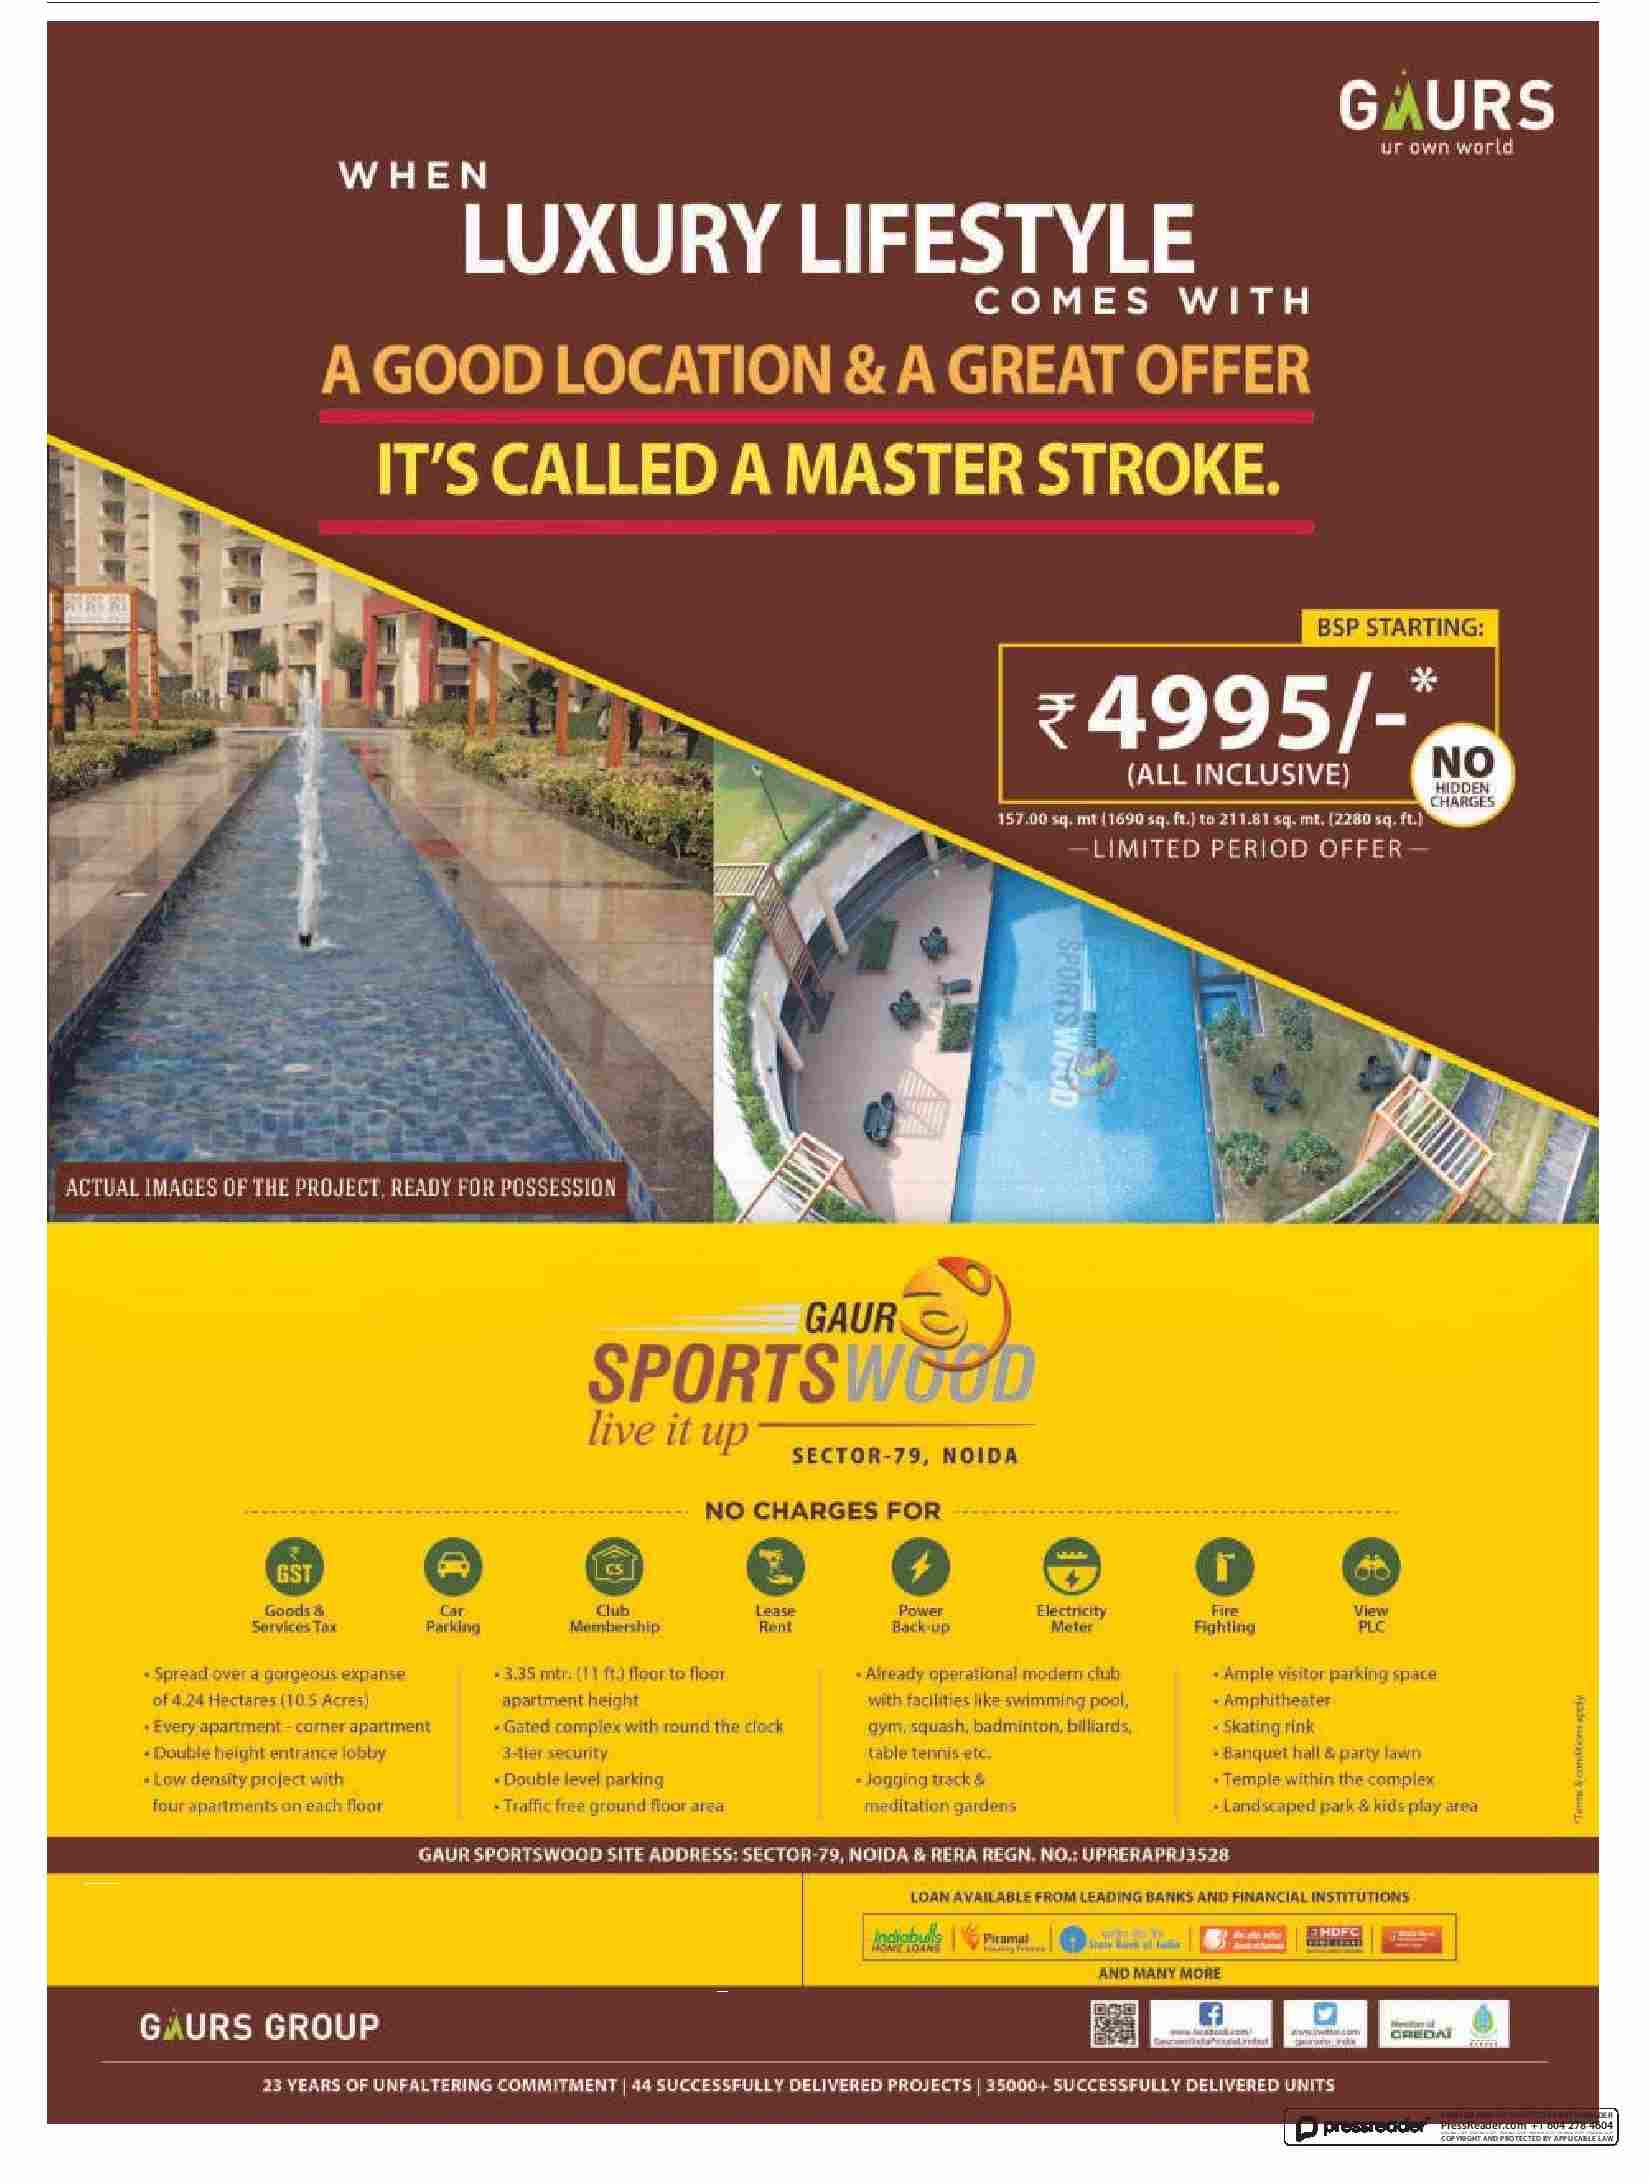 Book home with BSP starting at Rs. 4995 at Gaur Sportswood in Noida Update